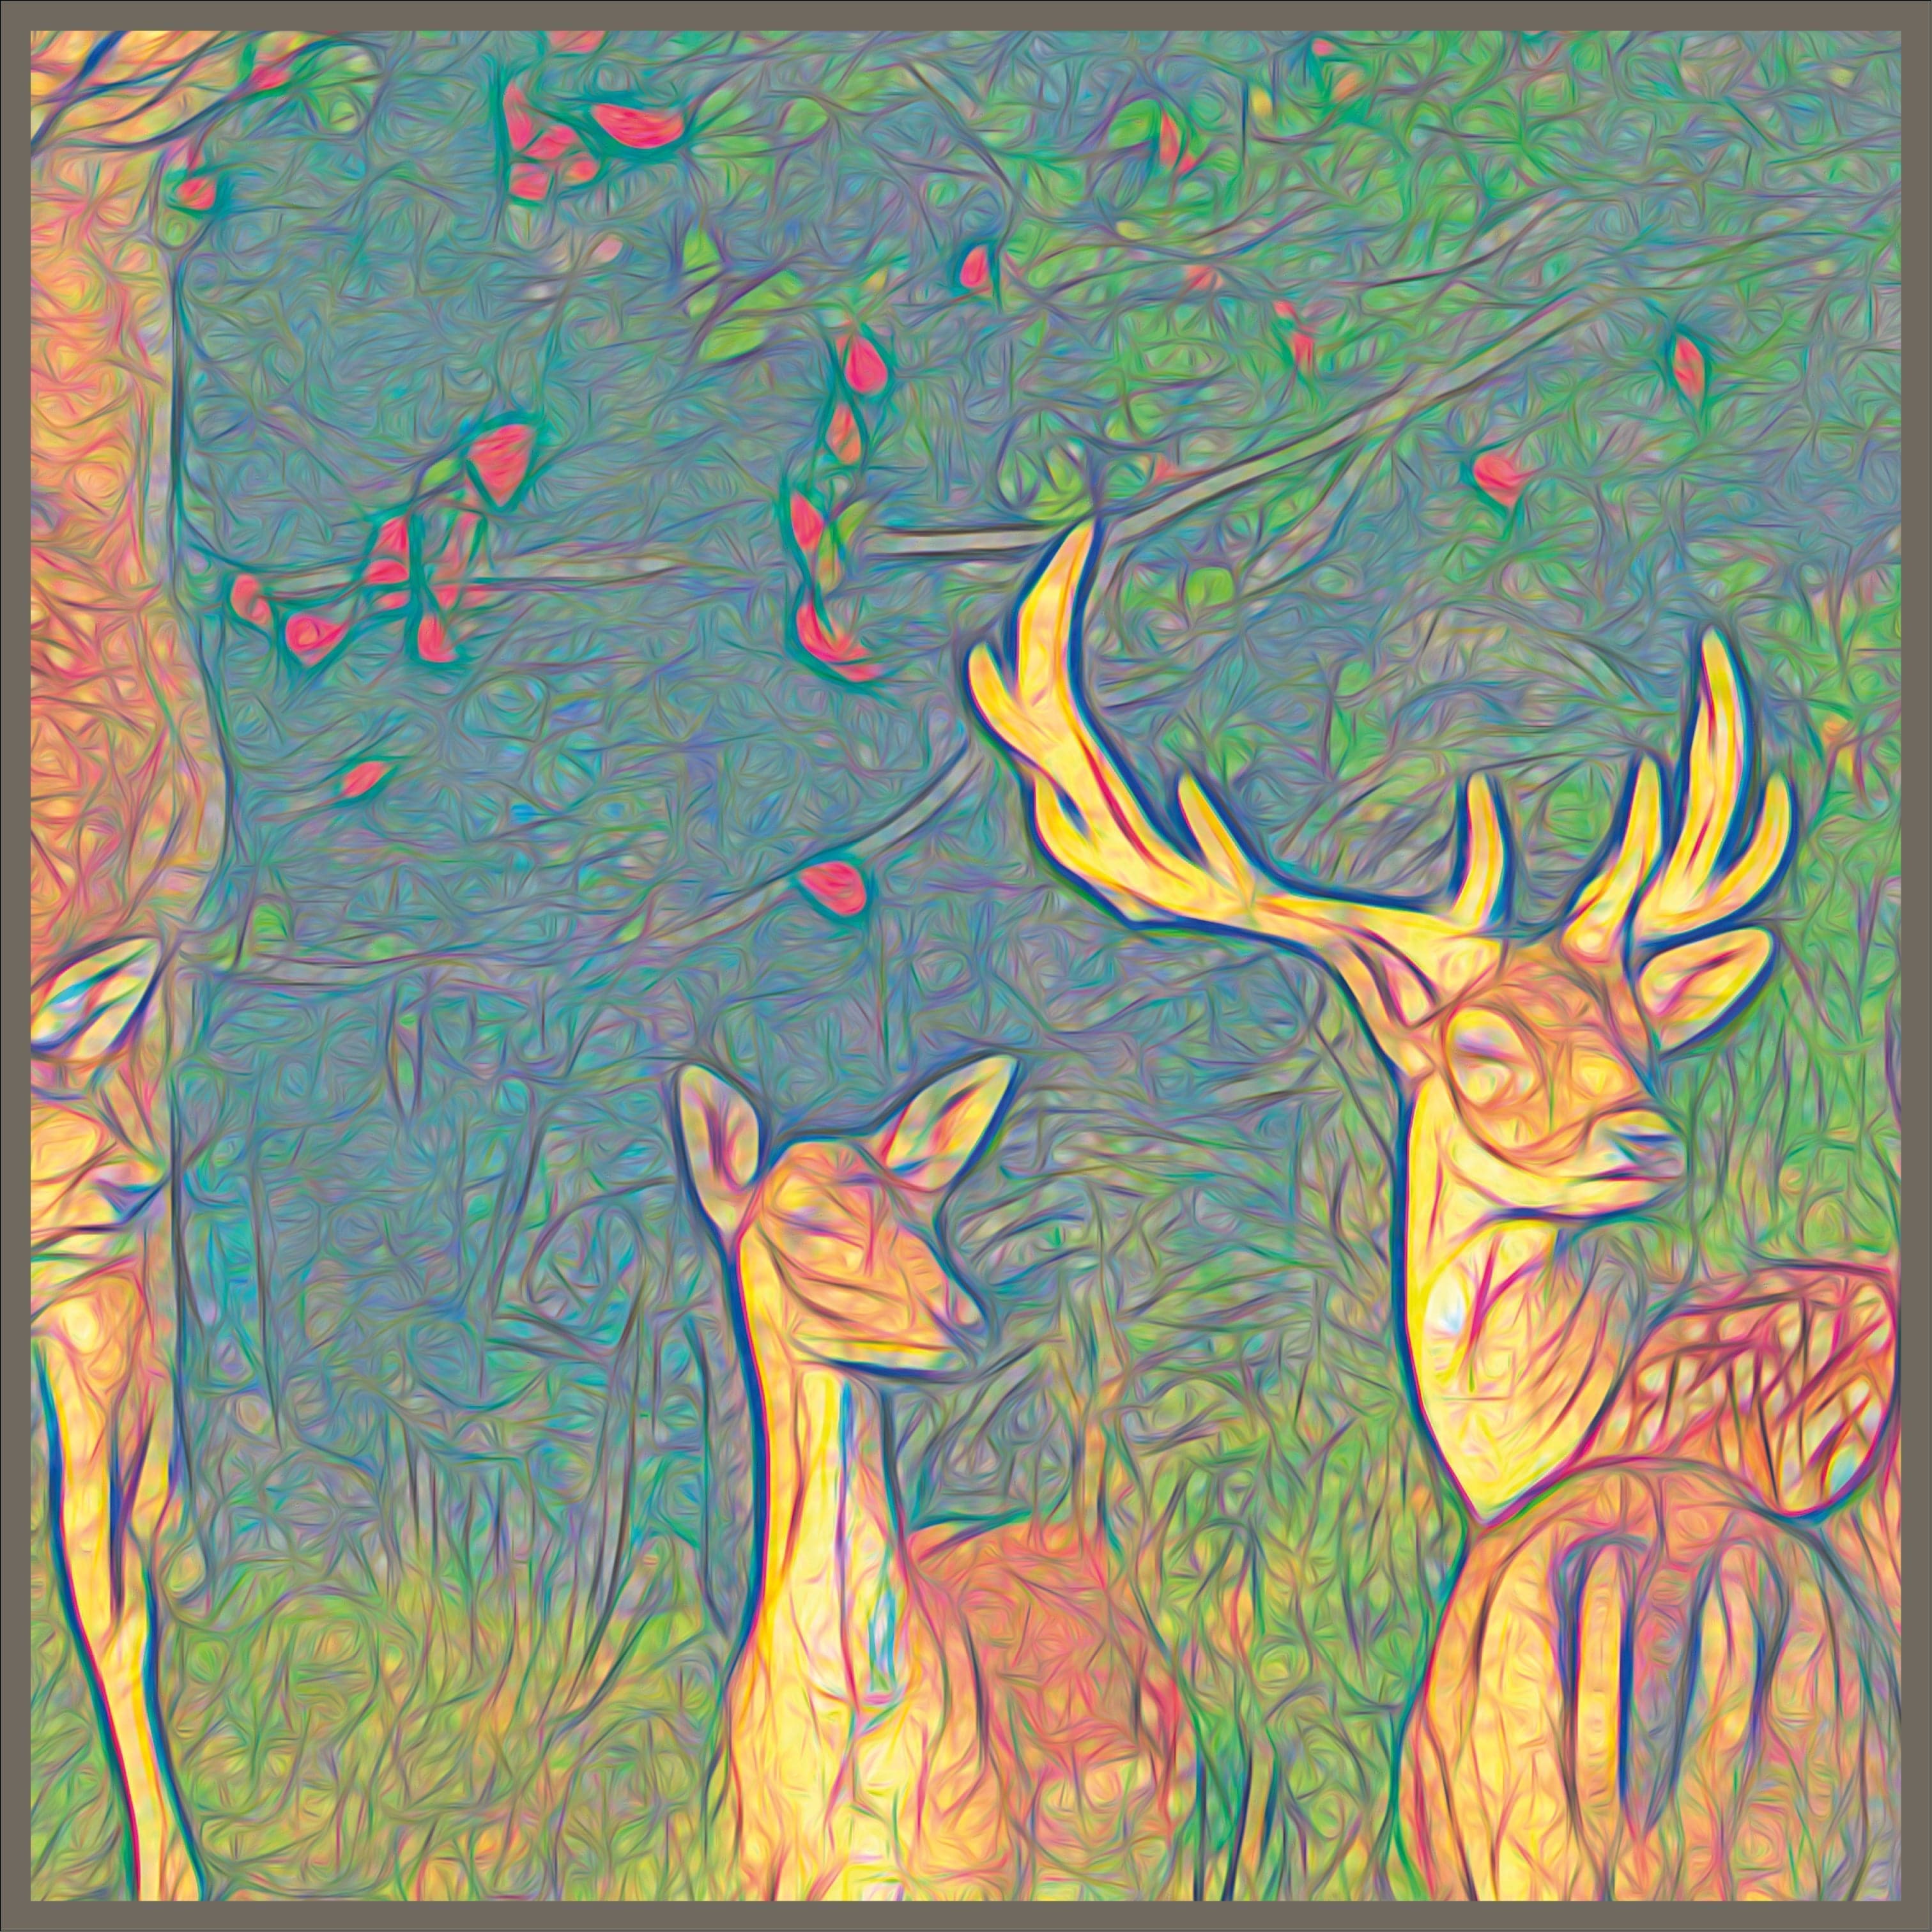 Deer pack in the forest